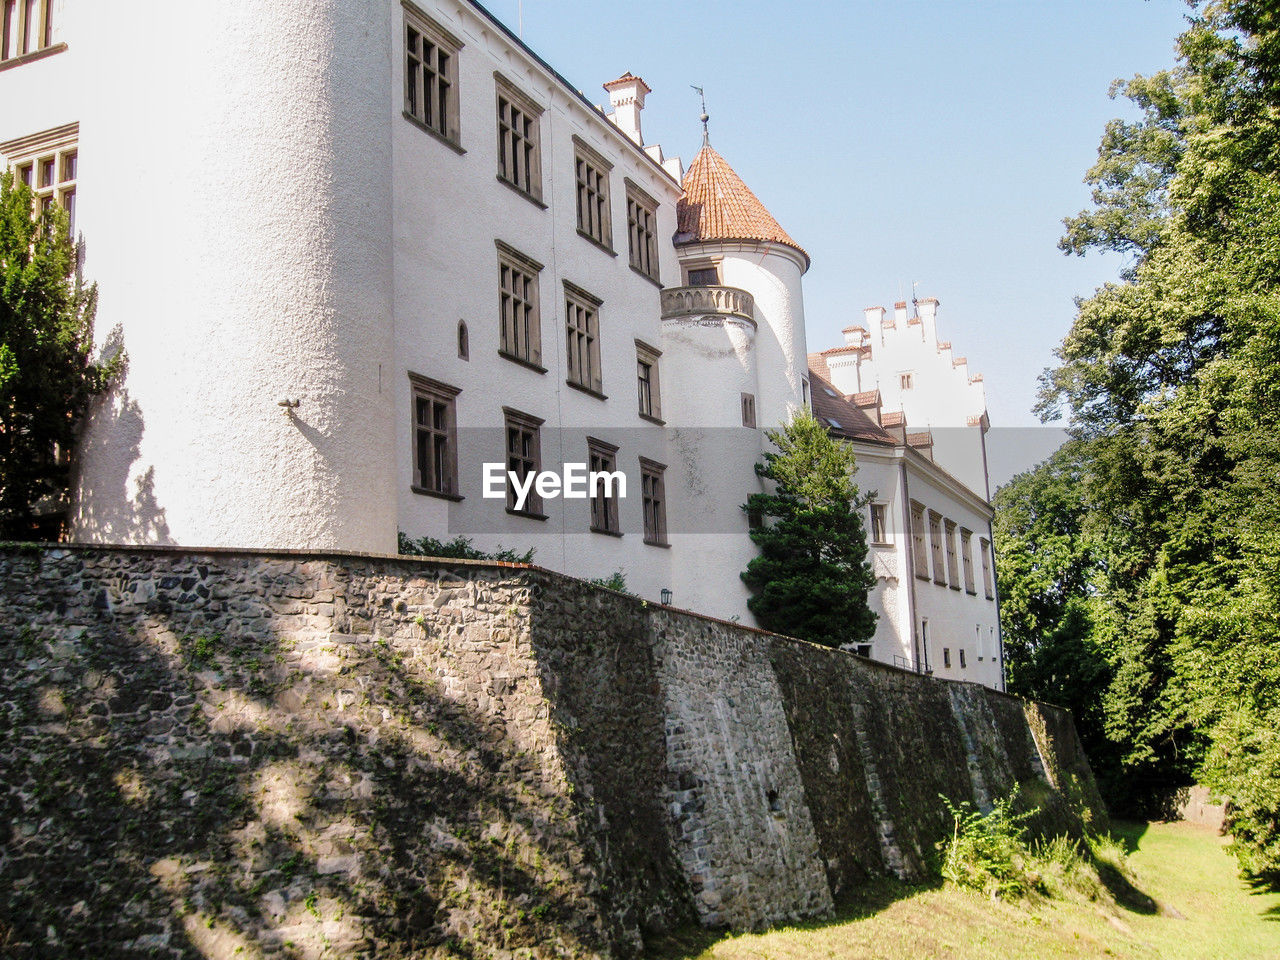 architecture, building exterior, built structure, building, château, nature, plant, residential district, house, sunlight, tree, estate, no people, city, day, window, sky, wall, sunny, clear sky, wall - building feature, outdoors, waterway, history, the past, low angle view, home, summer, castle